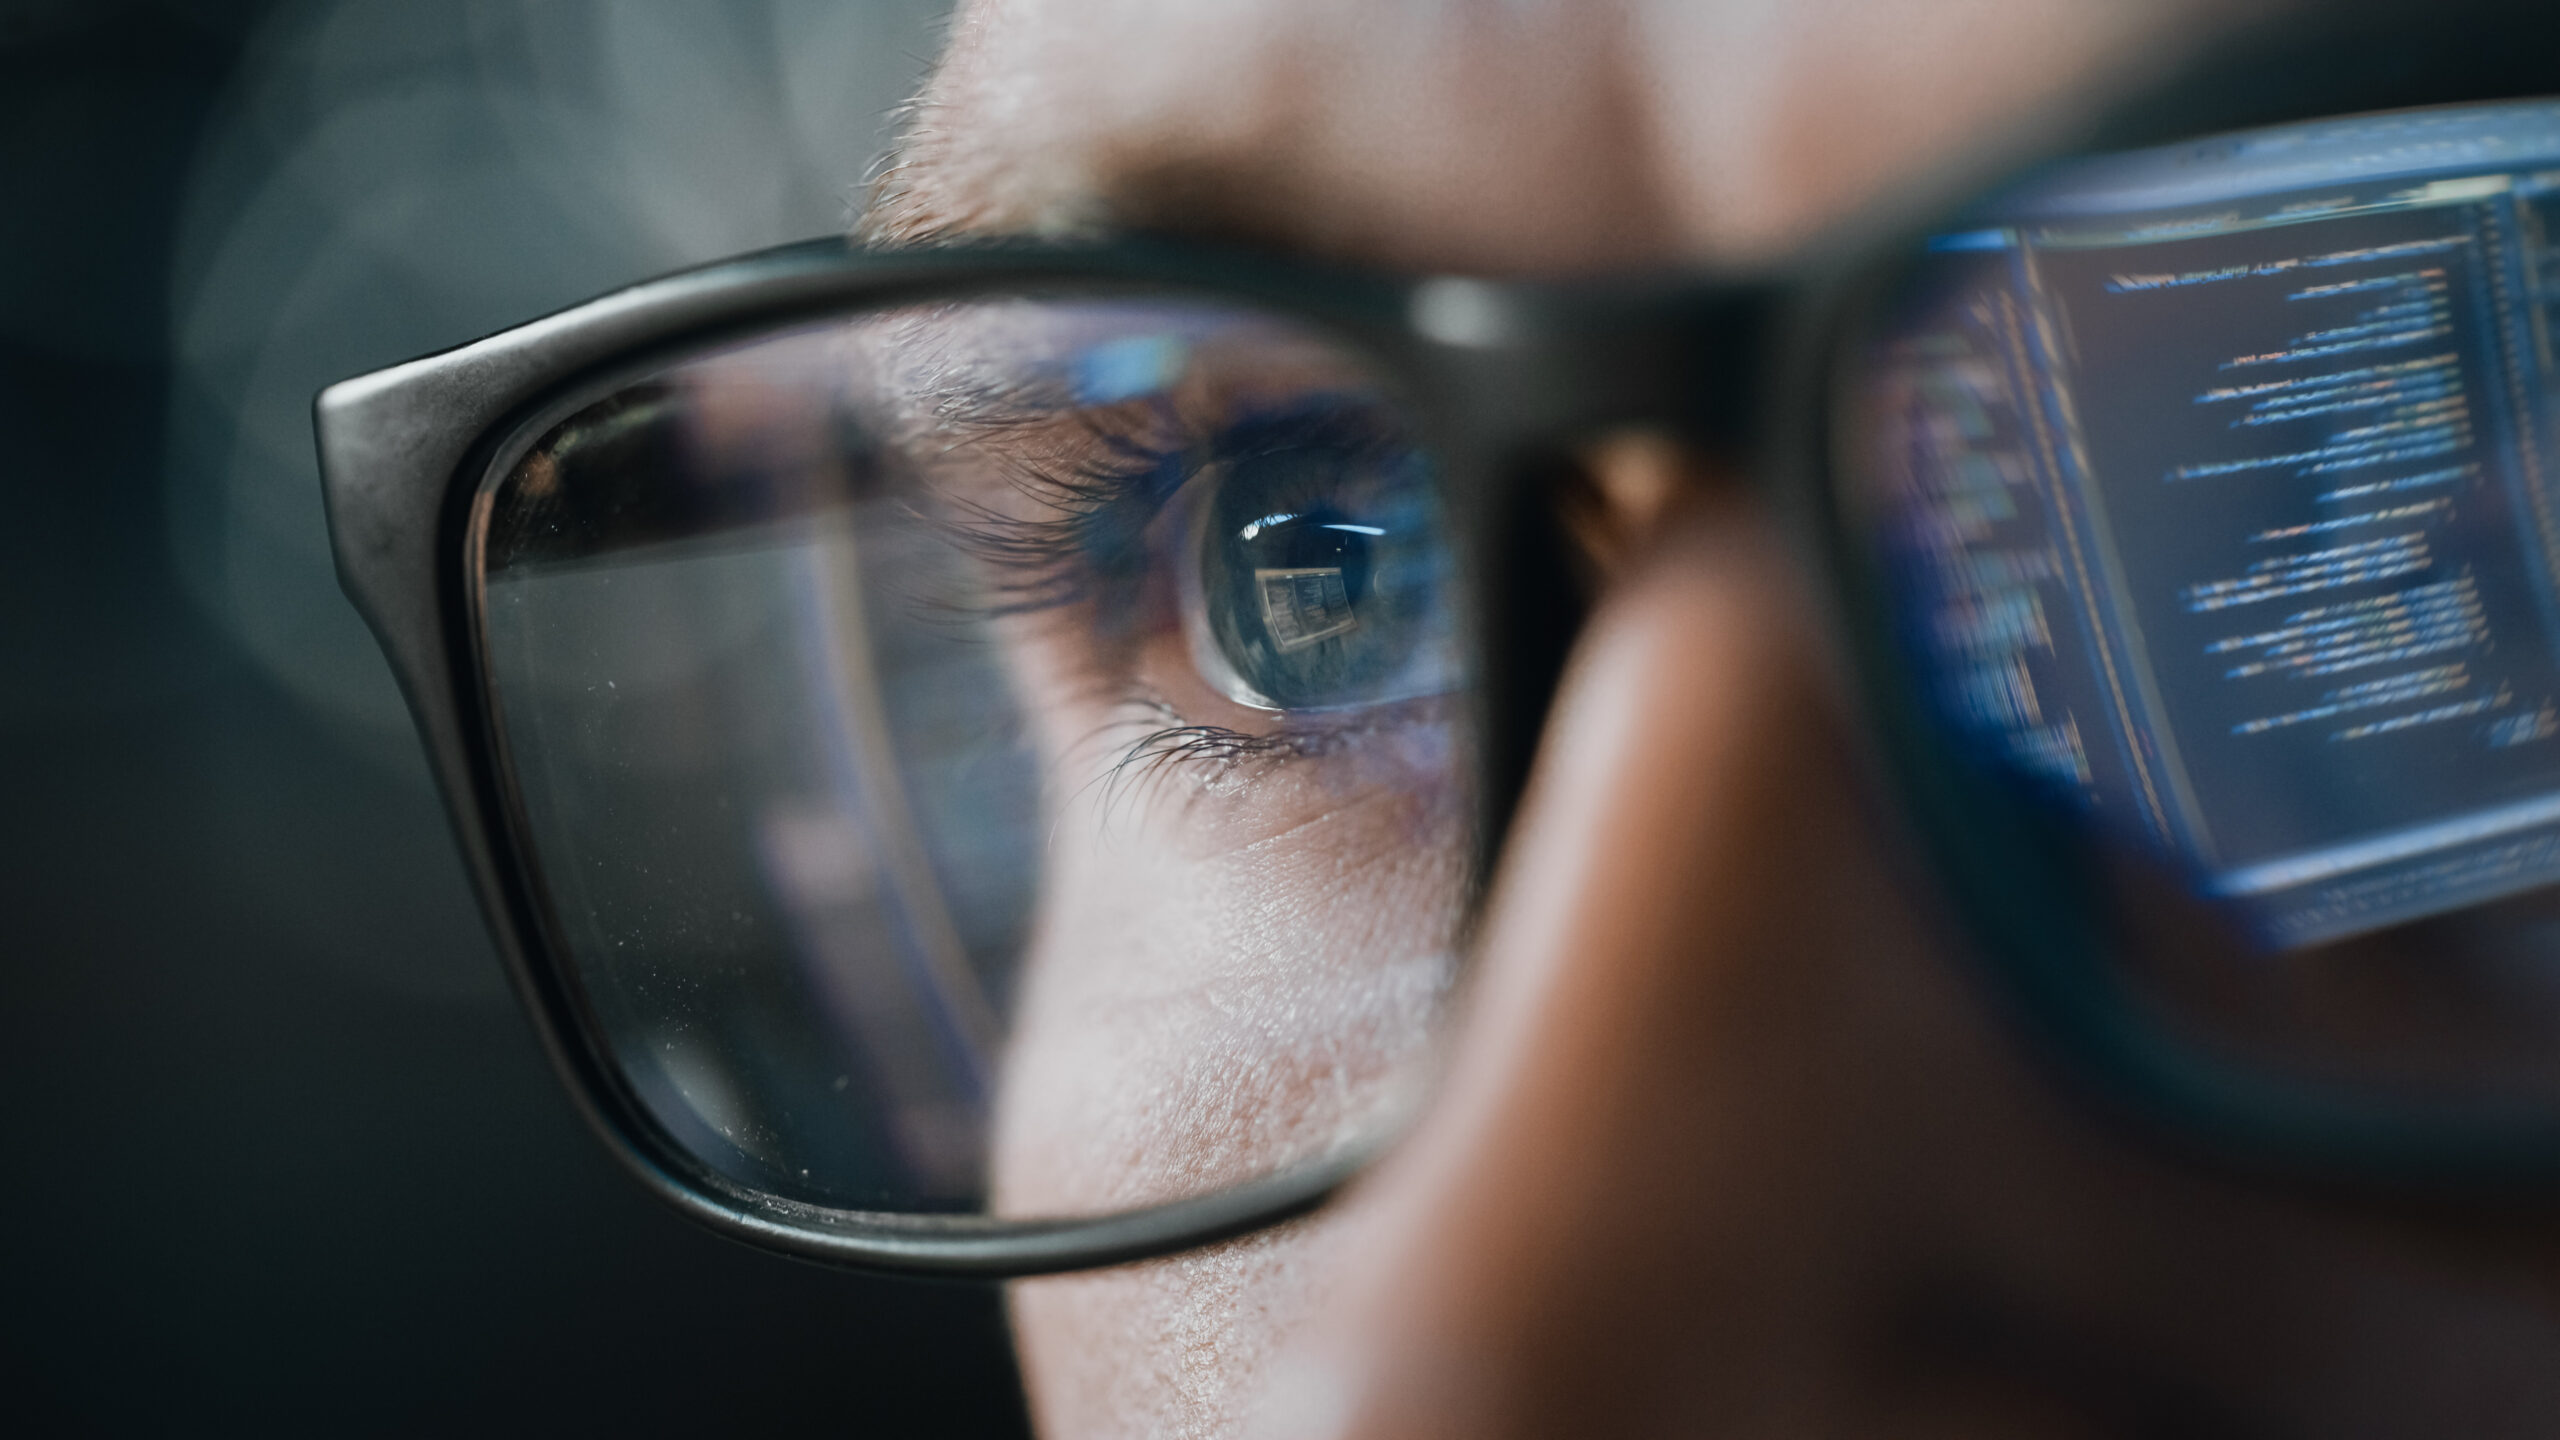 Close-up of a person's eye looking at a computer screen, reflecting a network management interface through their eyeglasses.